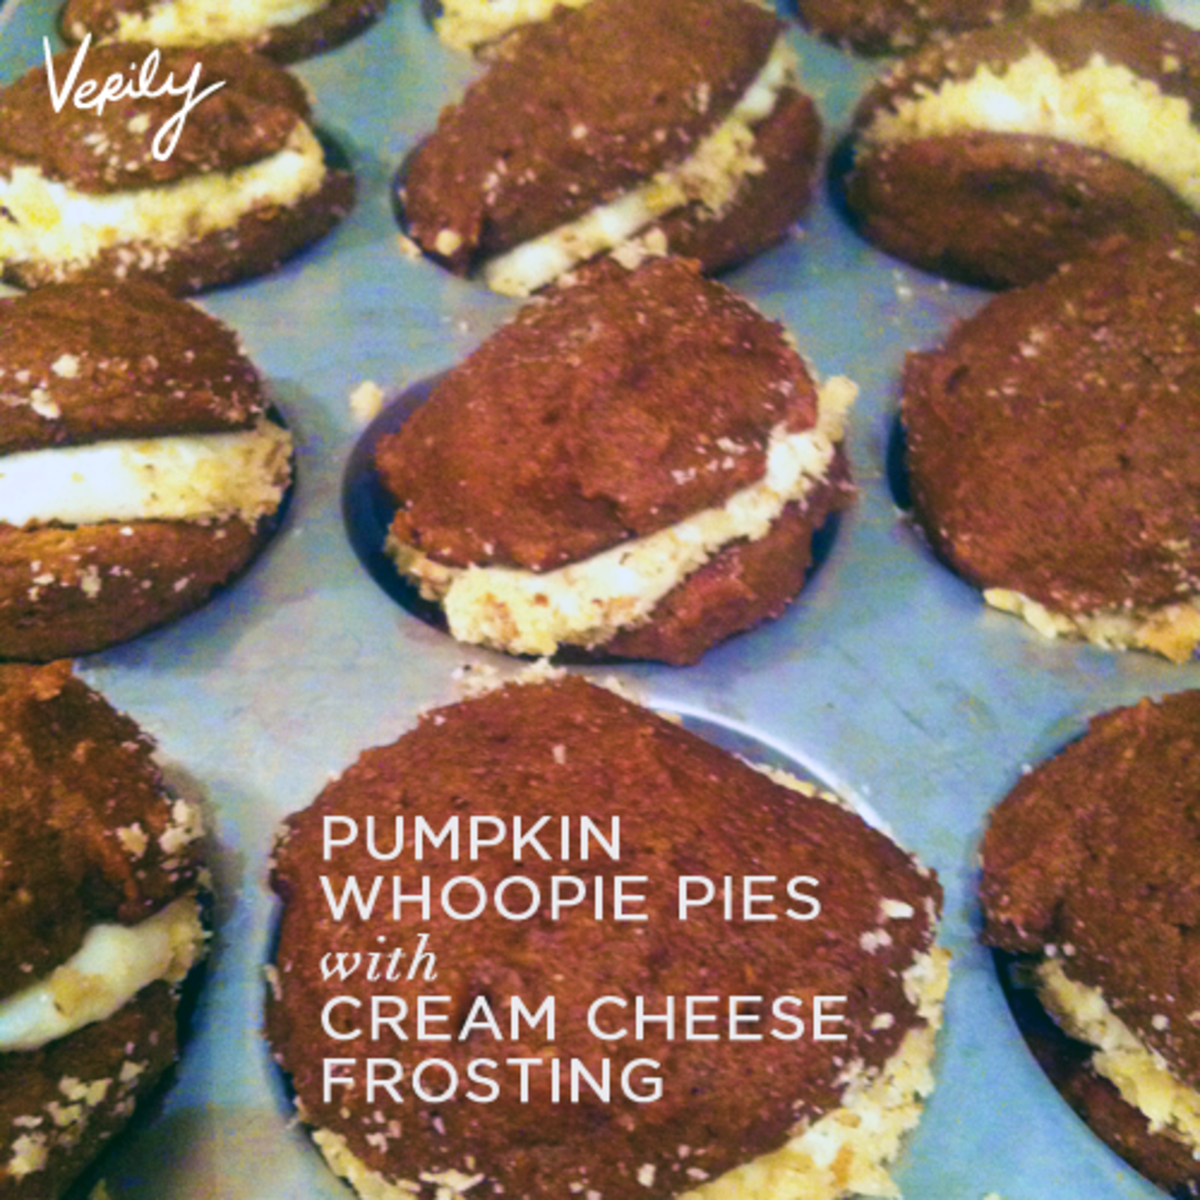 Verily Magazine Pumpkin Whoopie Pies with Cream Cheese Frosting